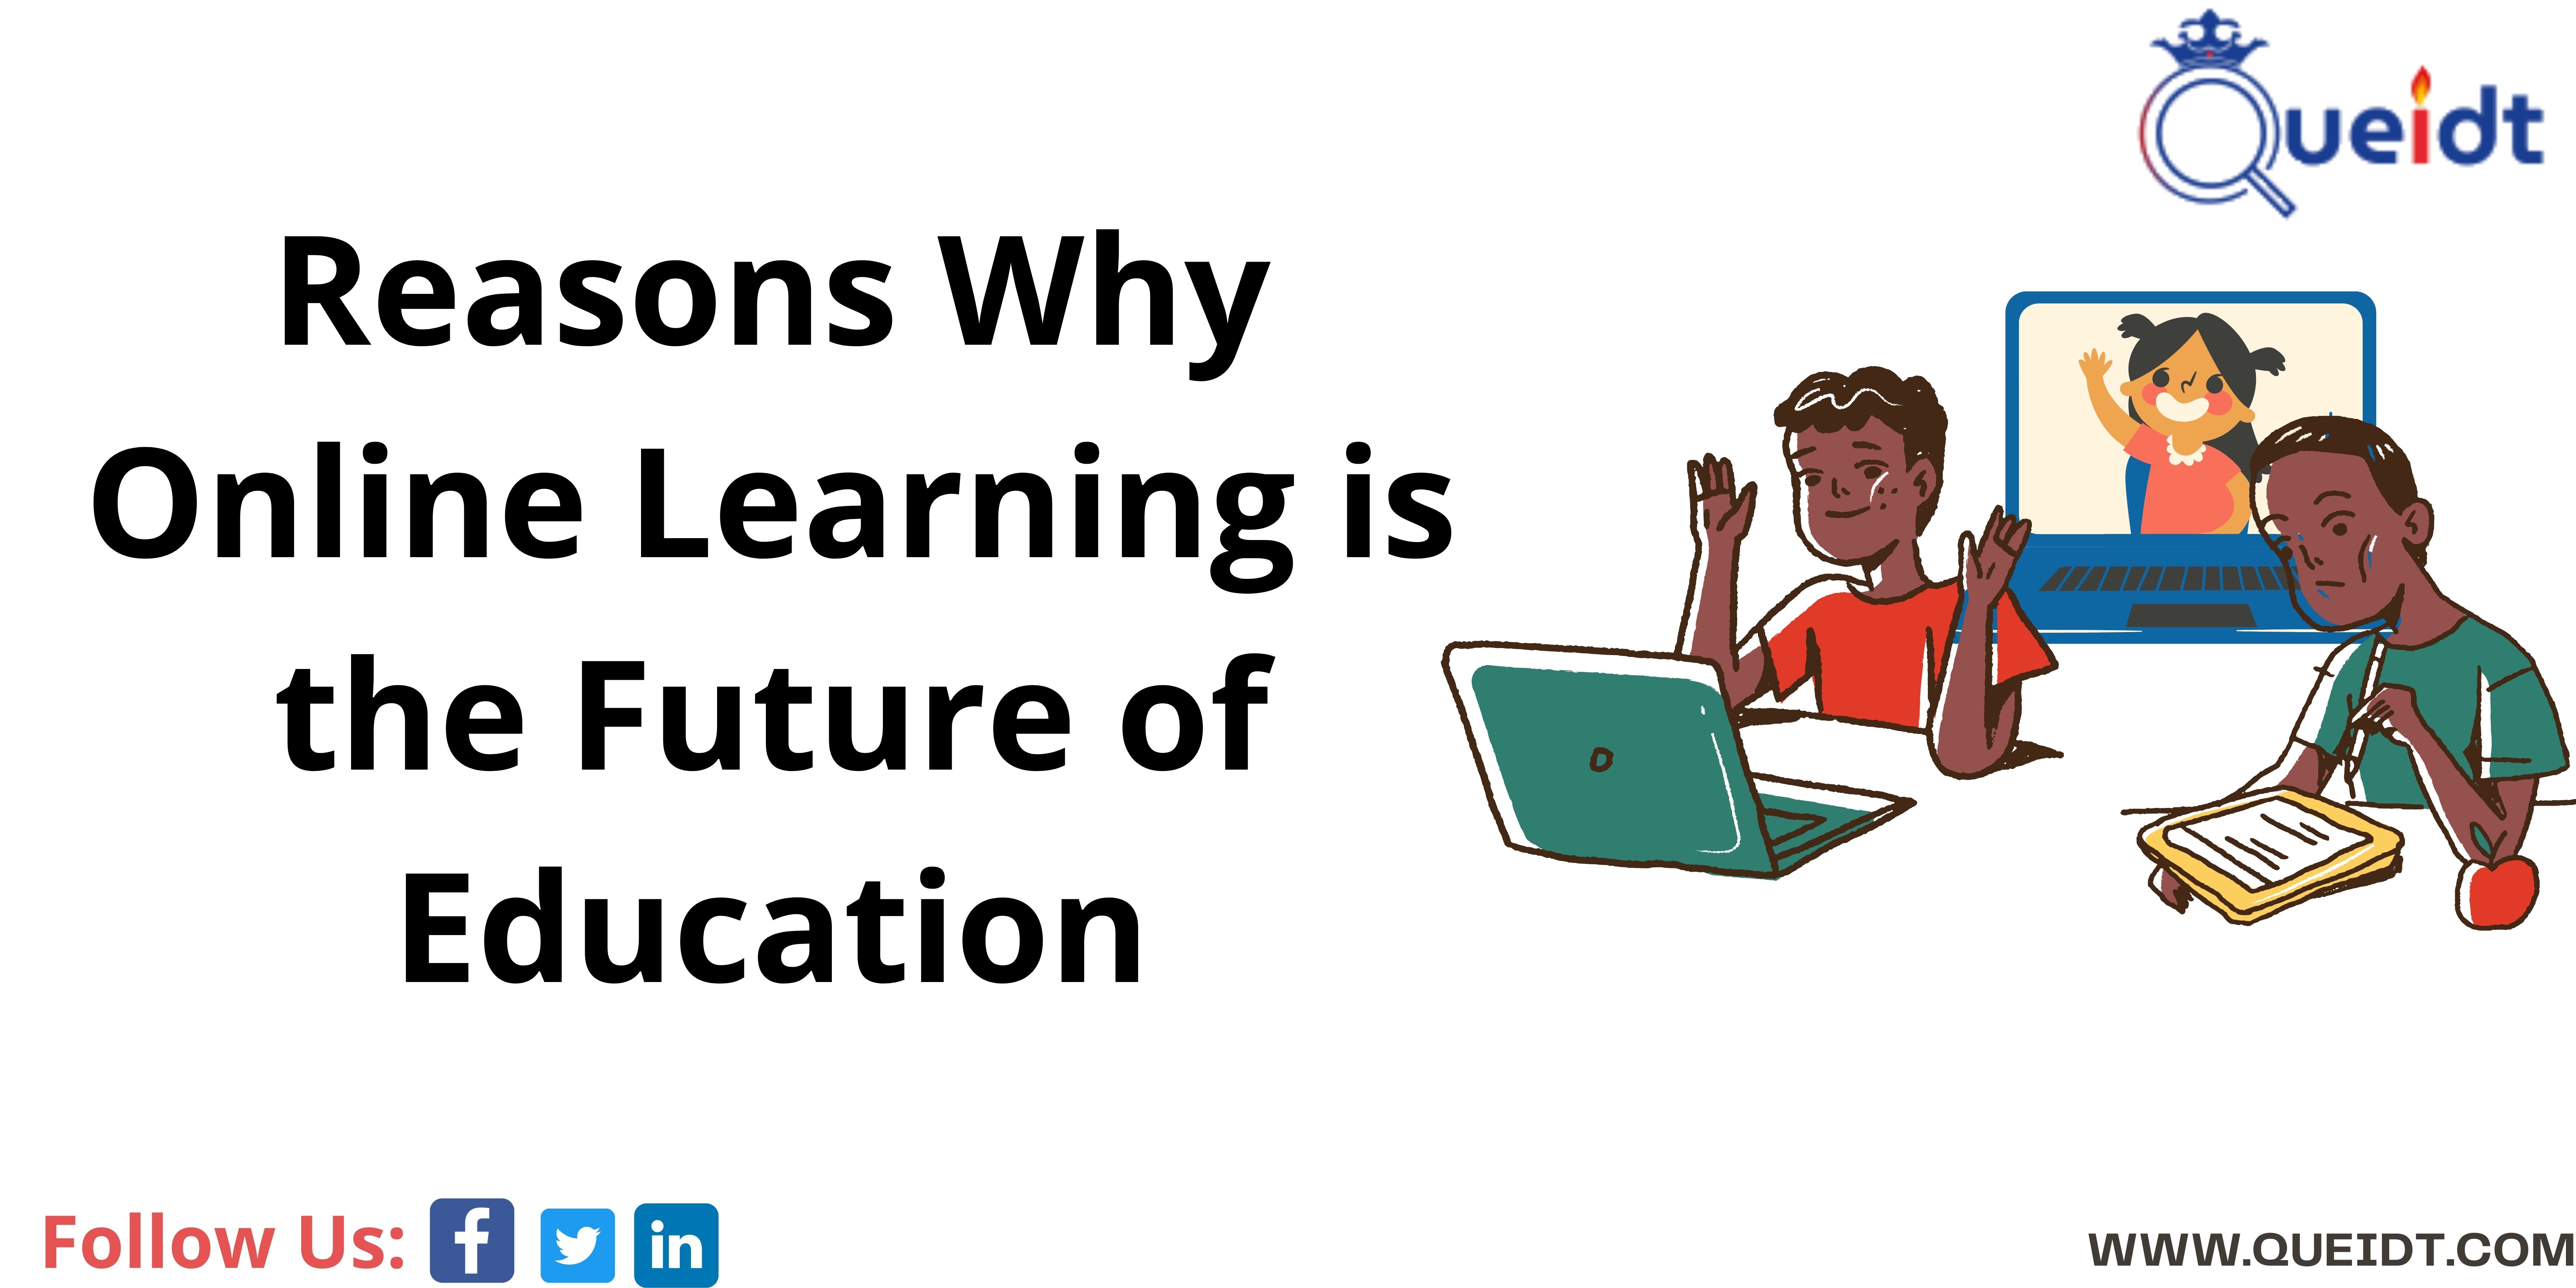 Reasons Why Online Learning is the Future of Education